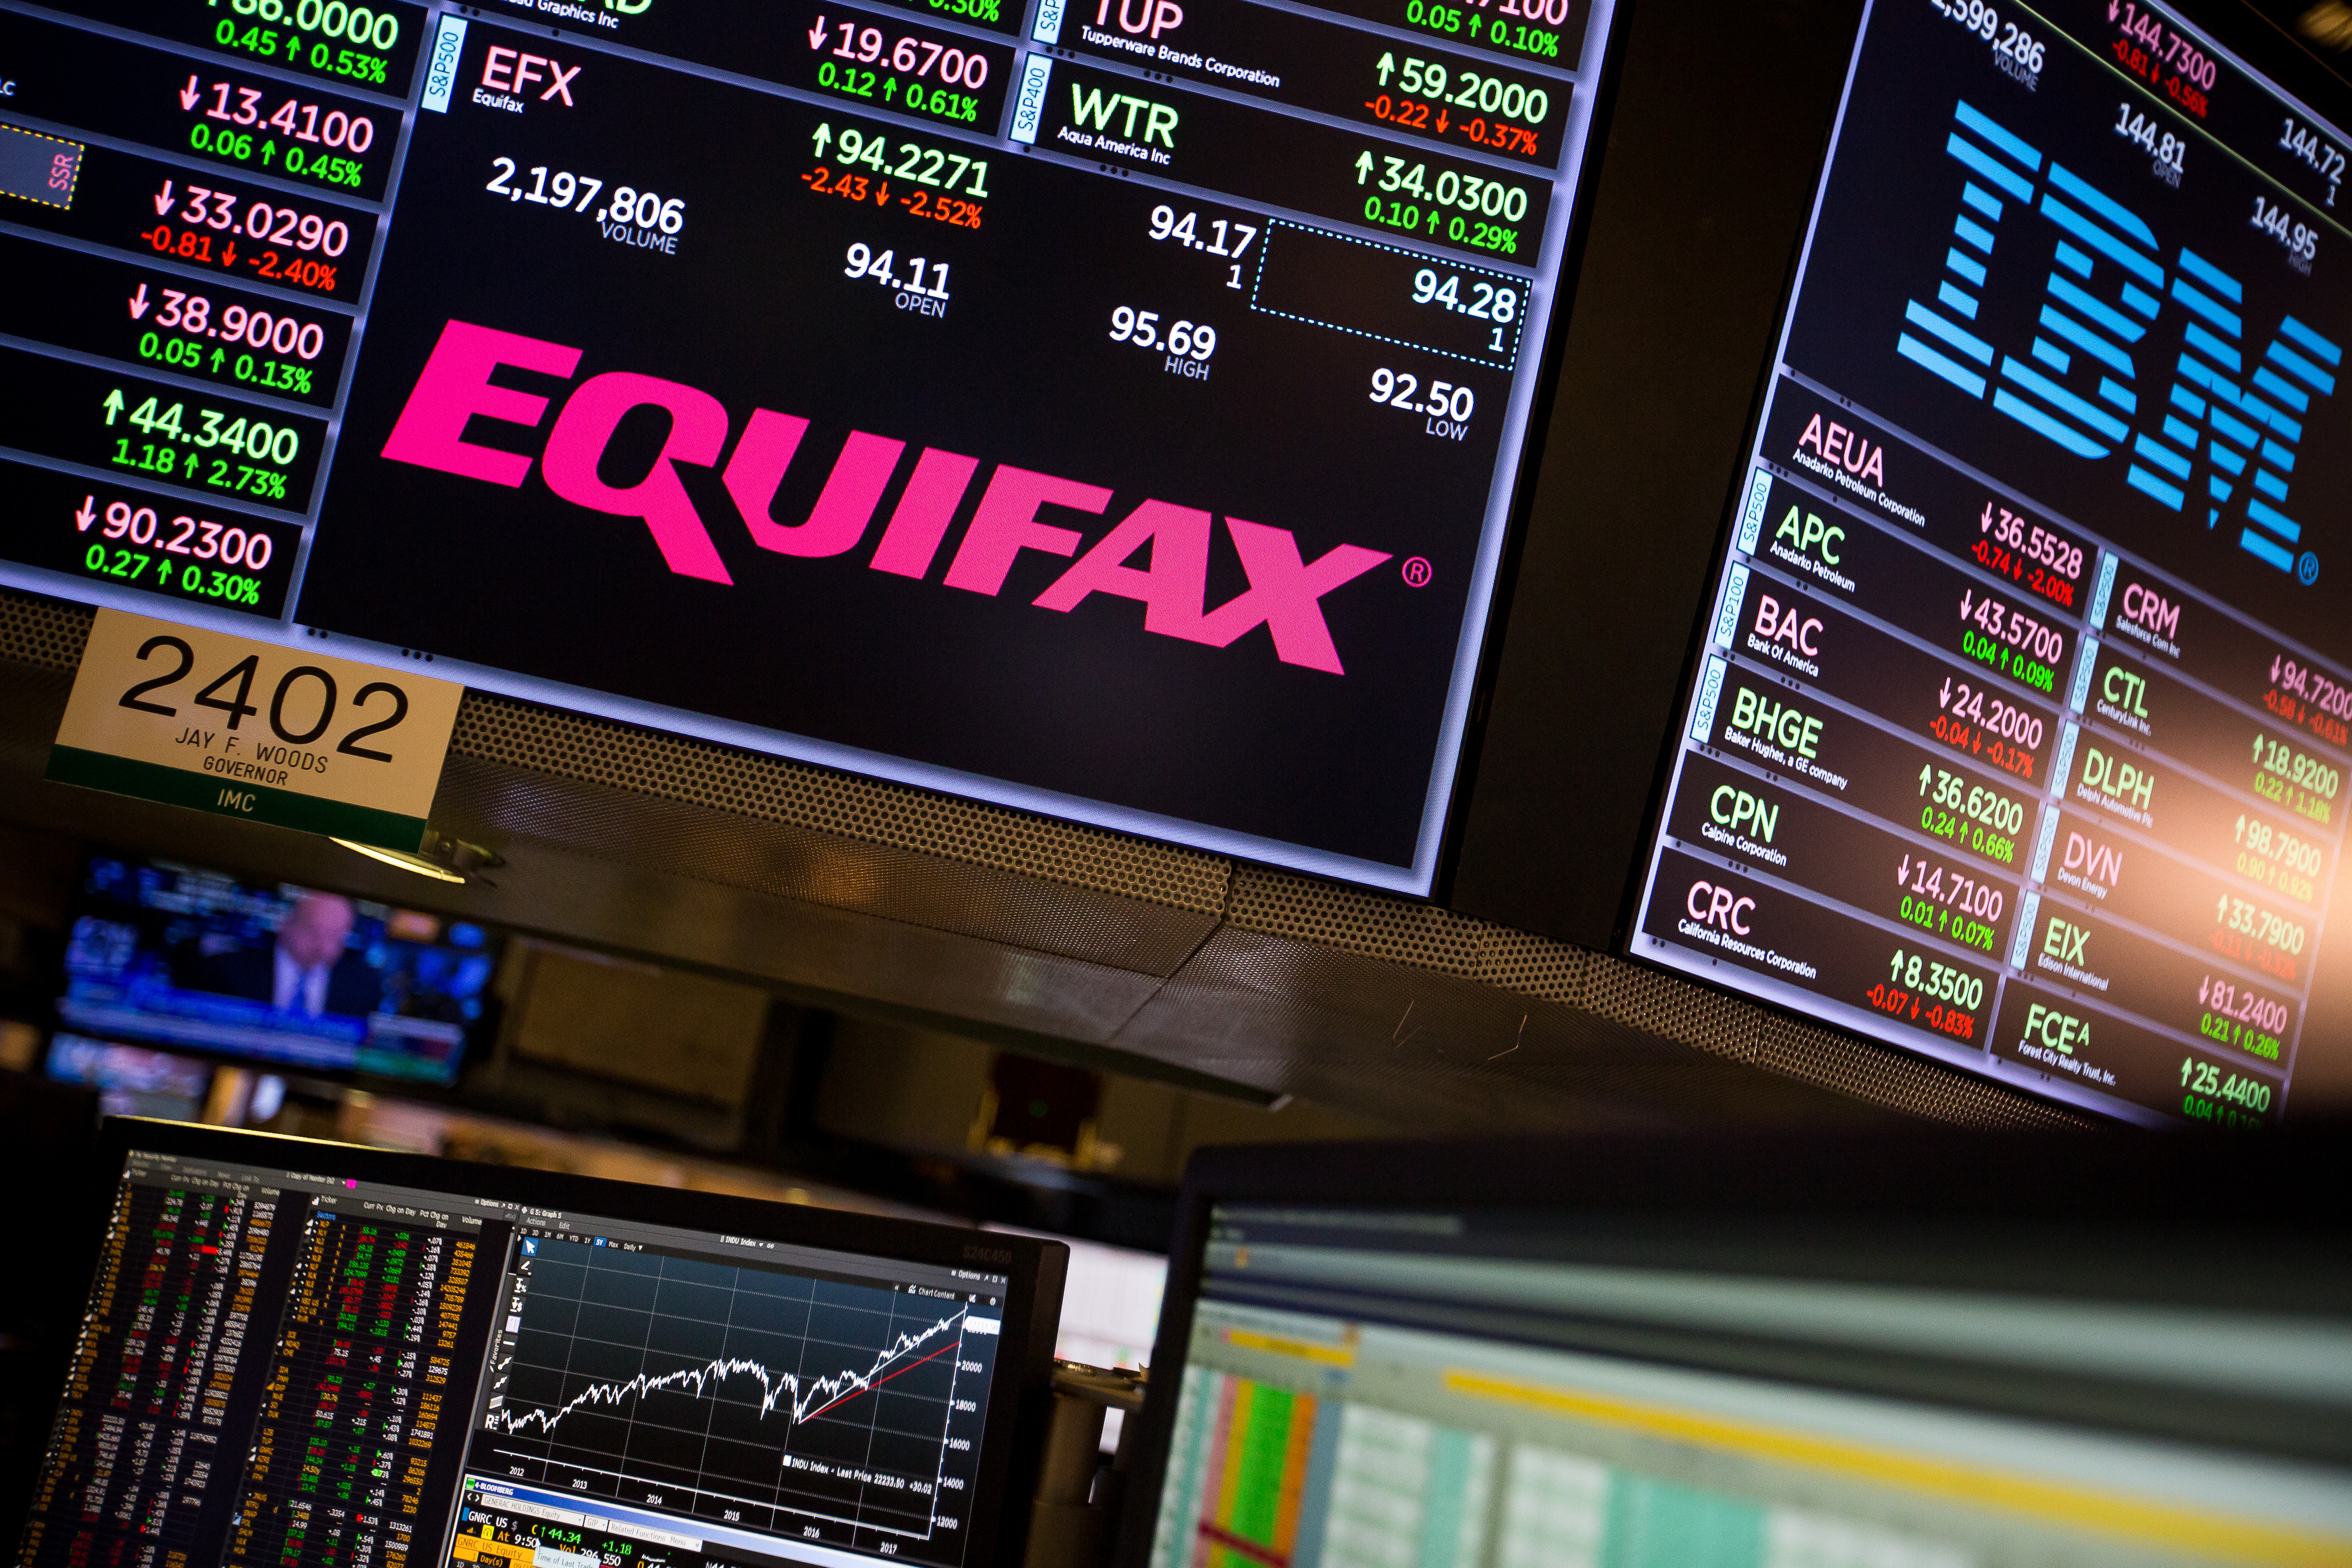 Senior Ex Equifax Executive Charged With Insider Trading Ars Technica